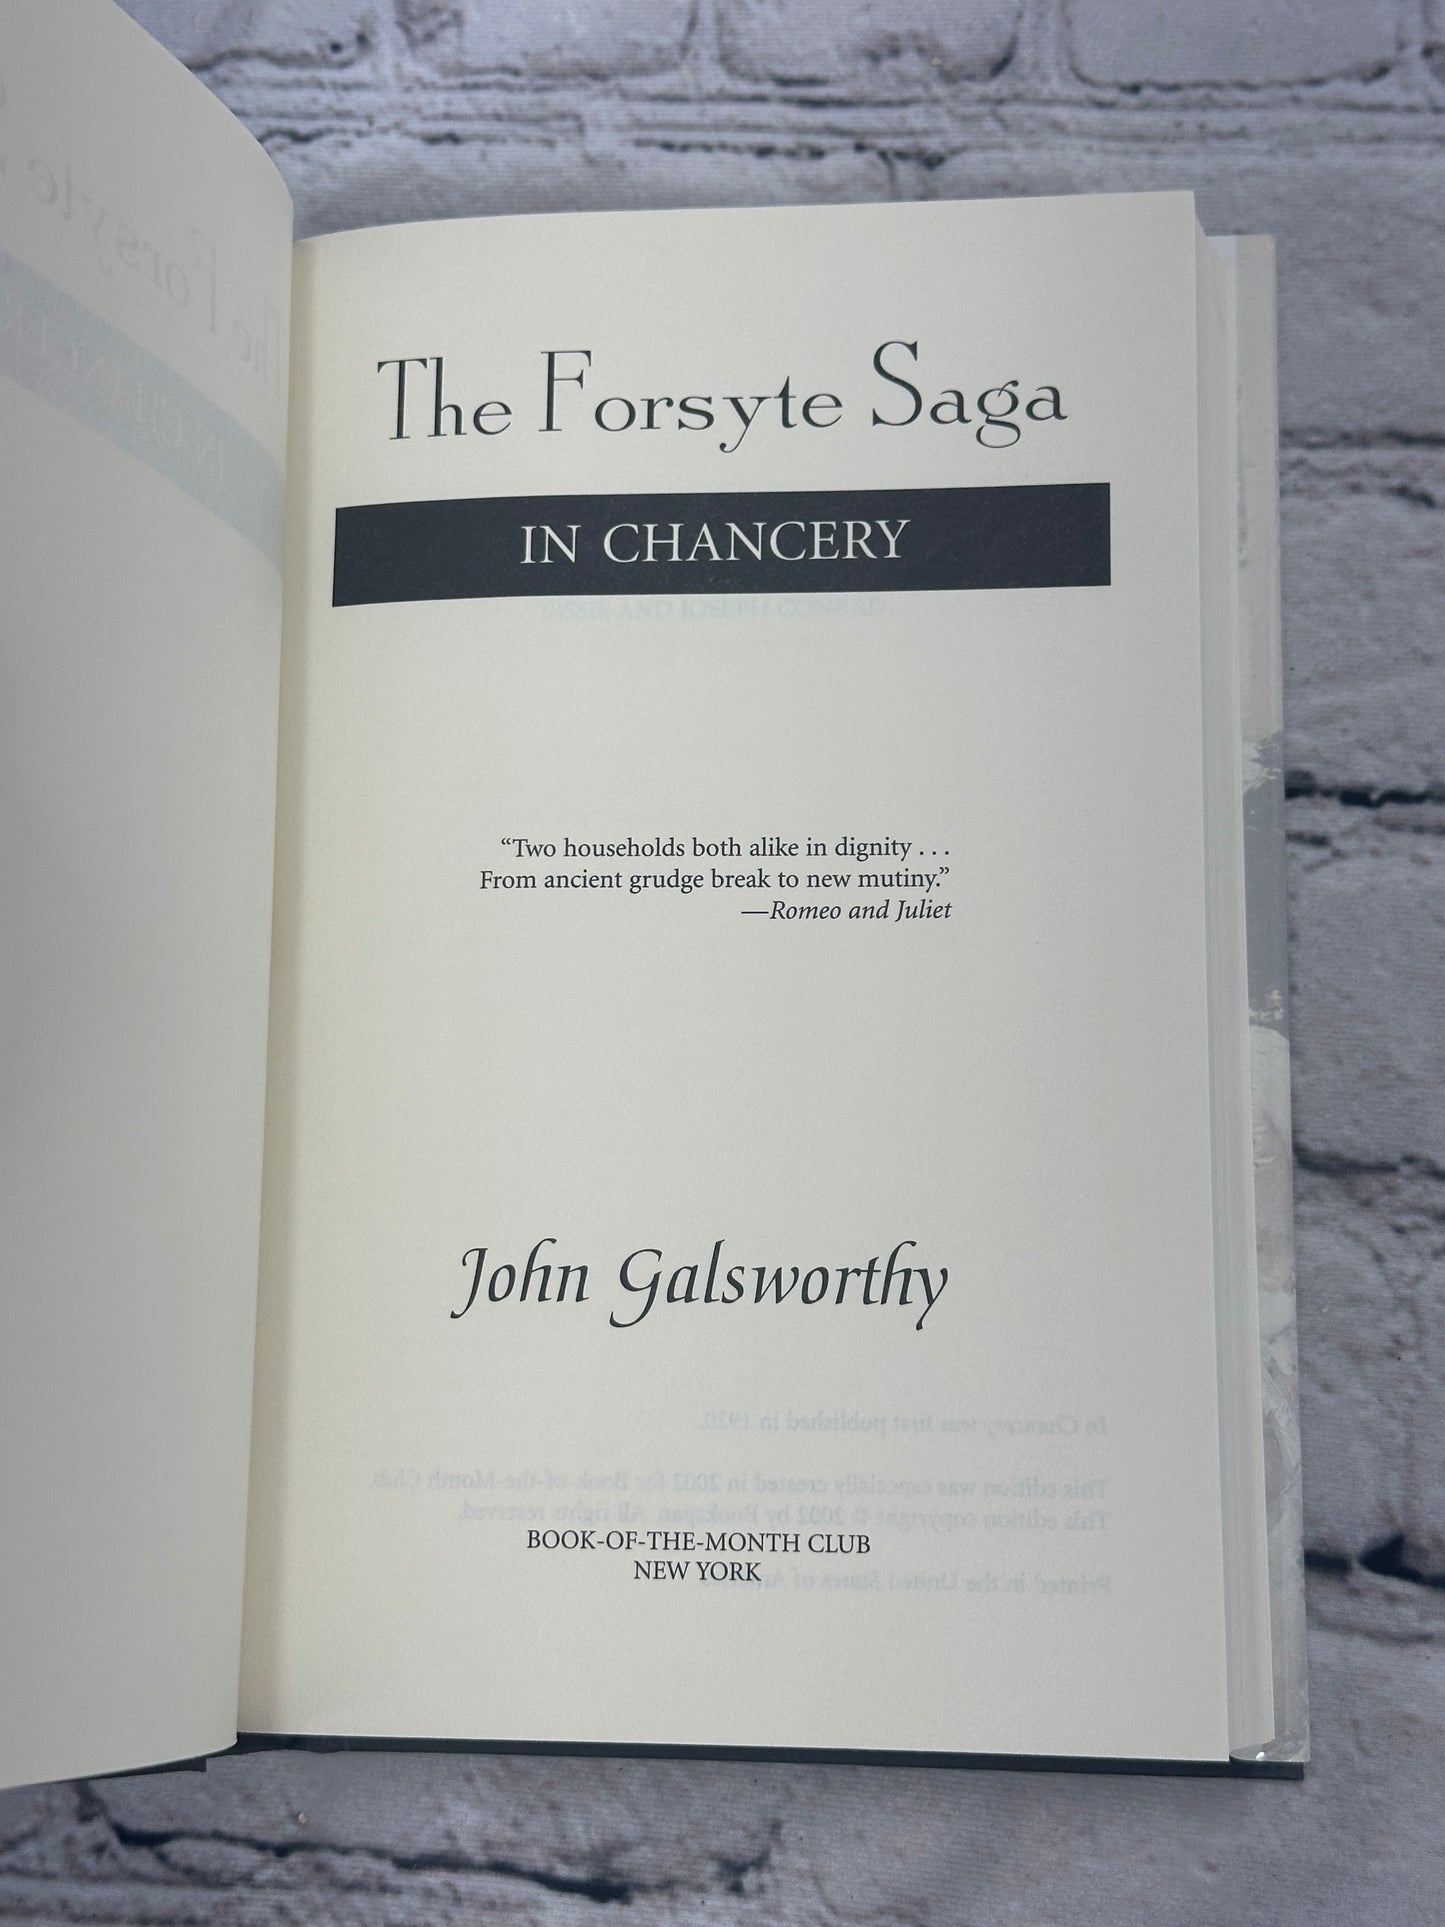 In Chancery by John Galsworthy [The Forsyte Saga · Book of the Month Club]